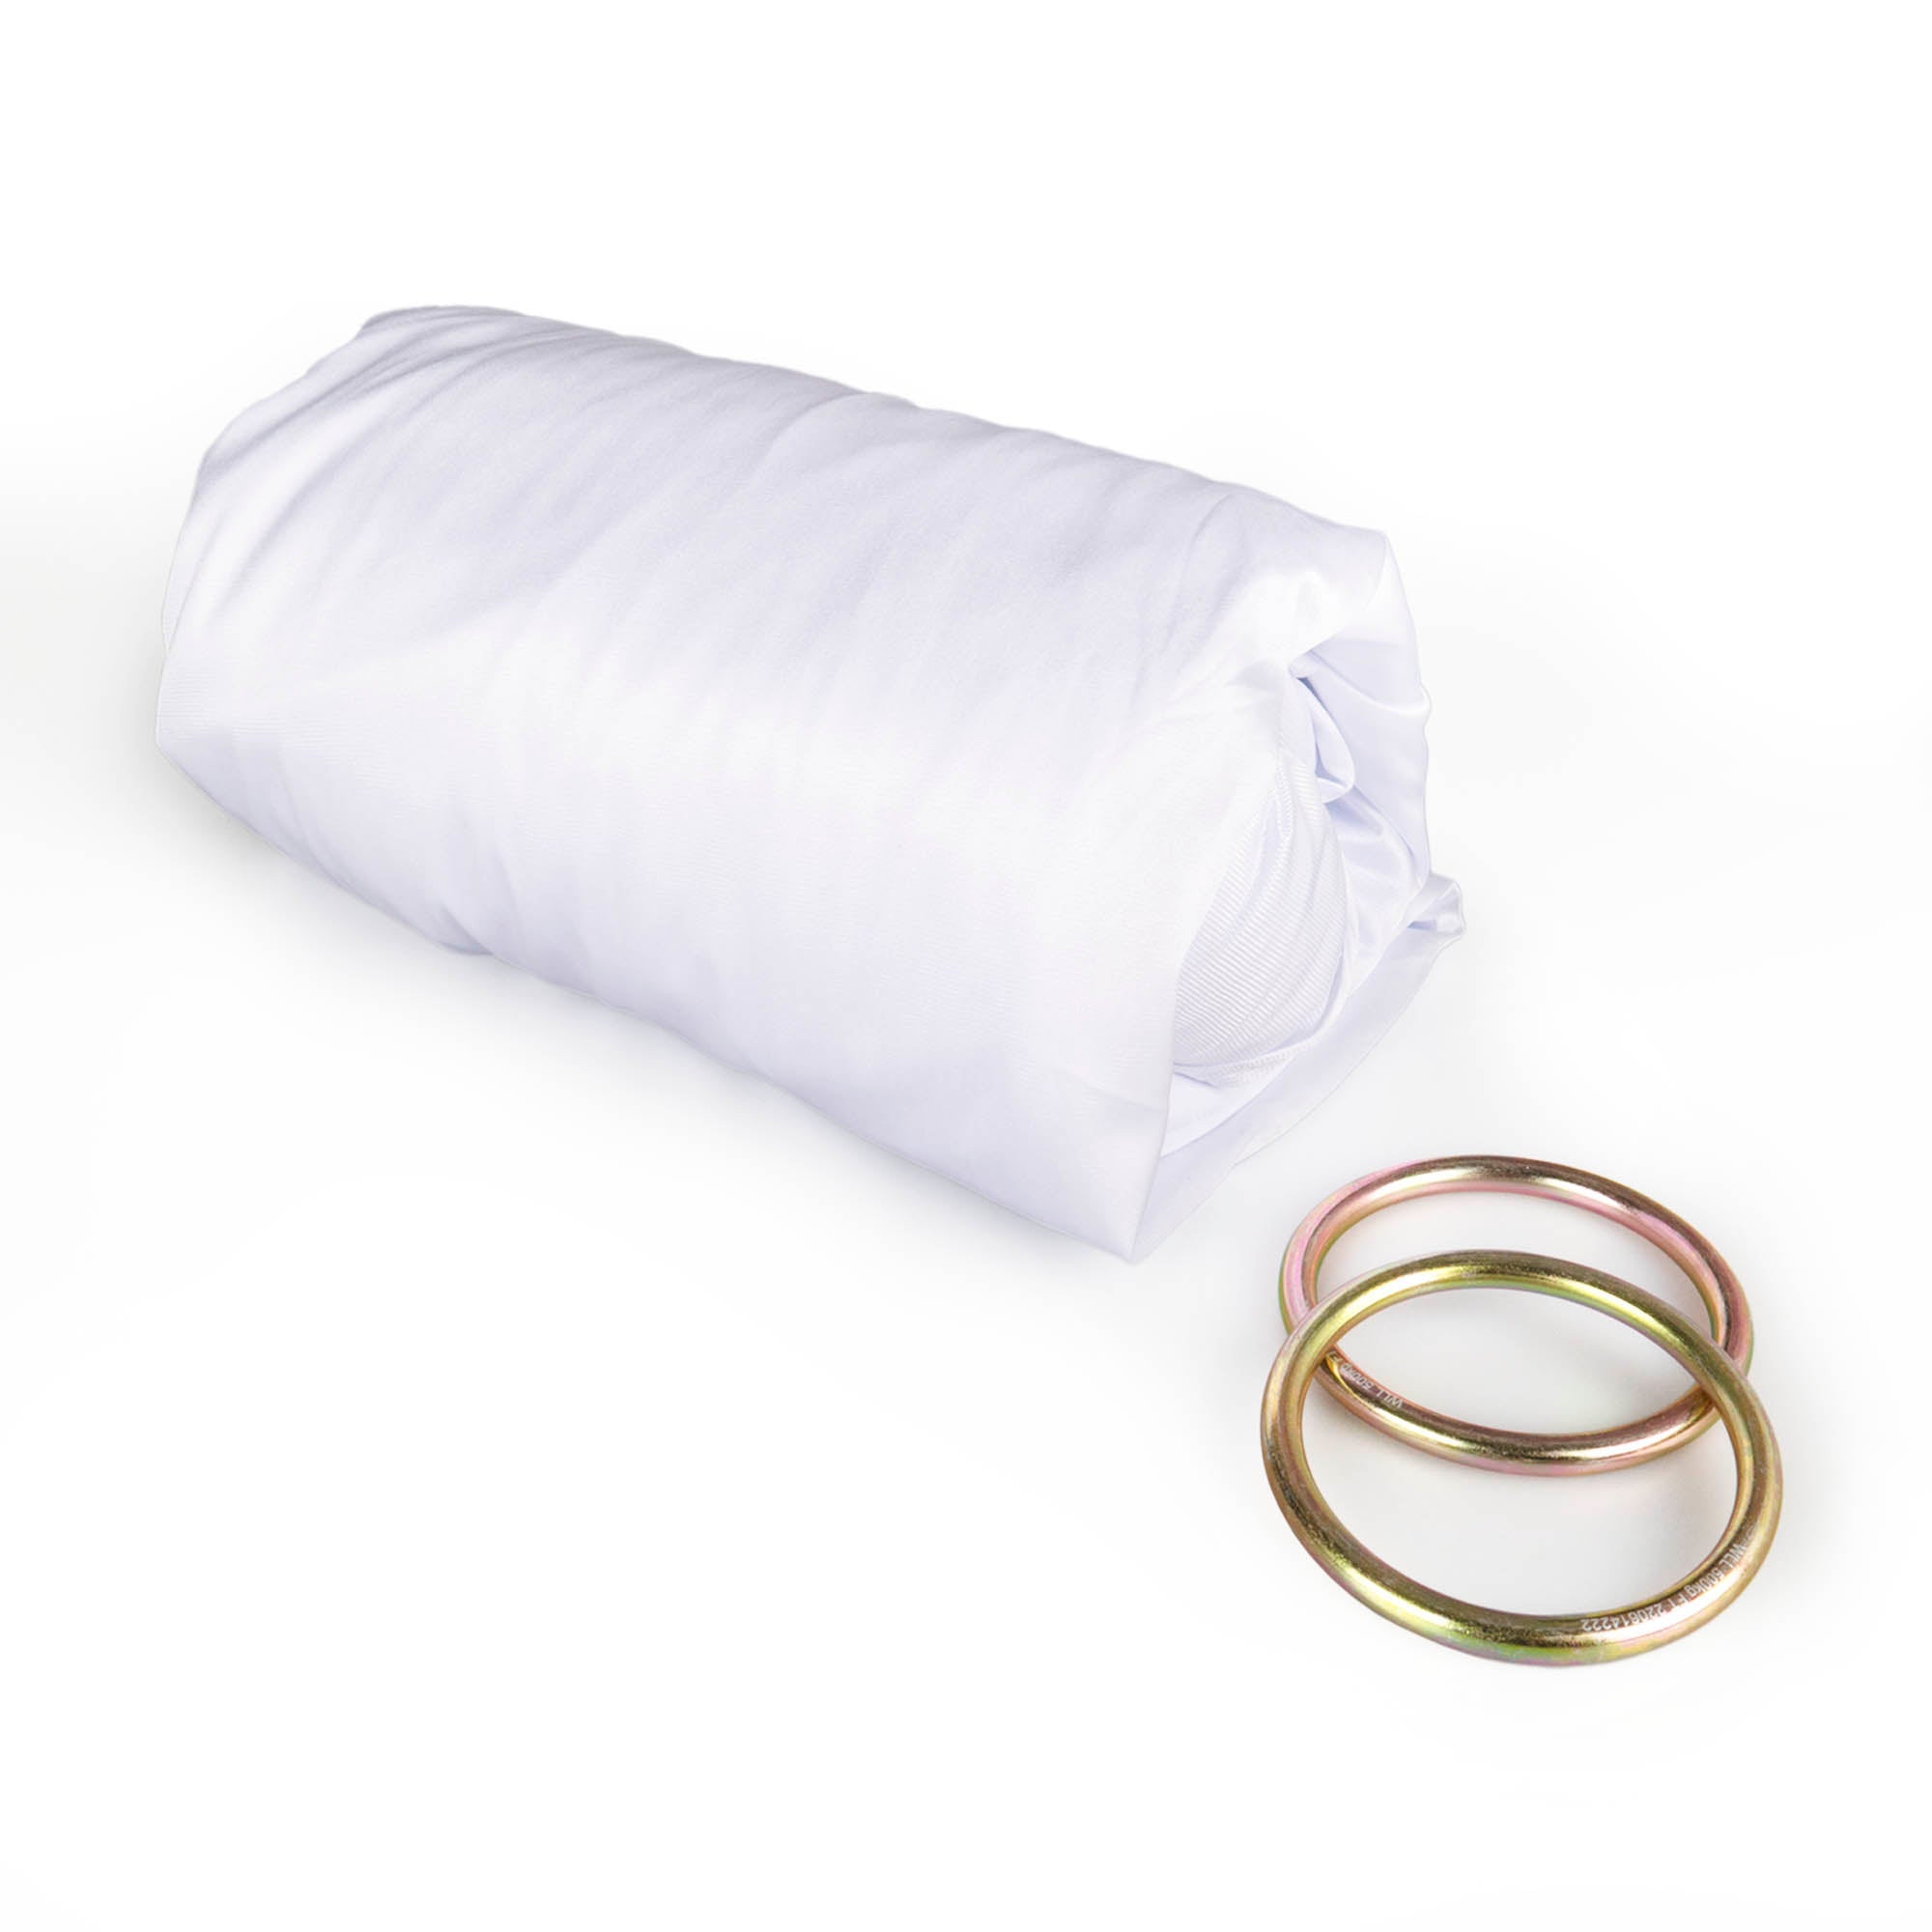 White yoga hammock rolled up with rings detached